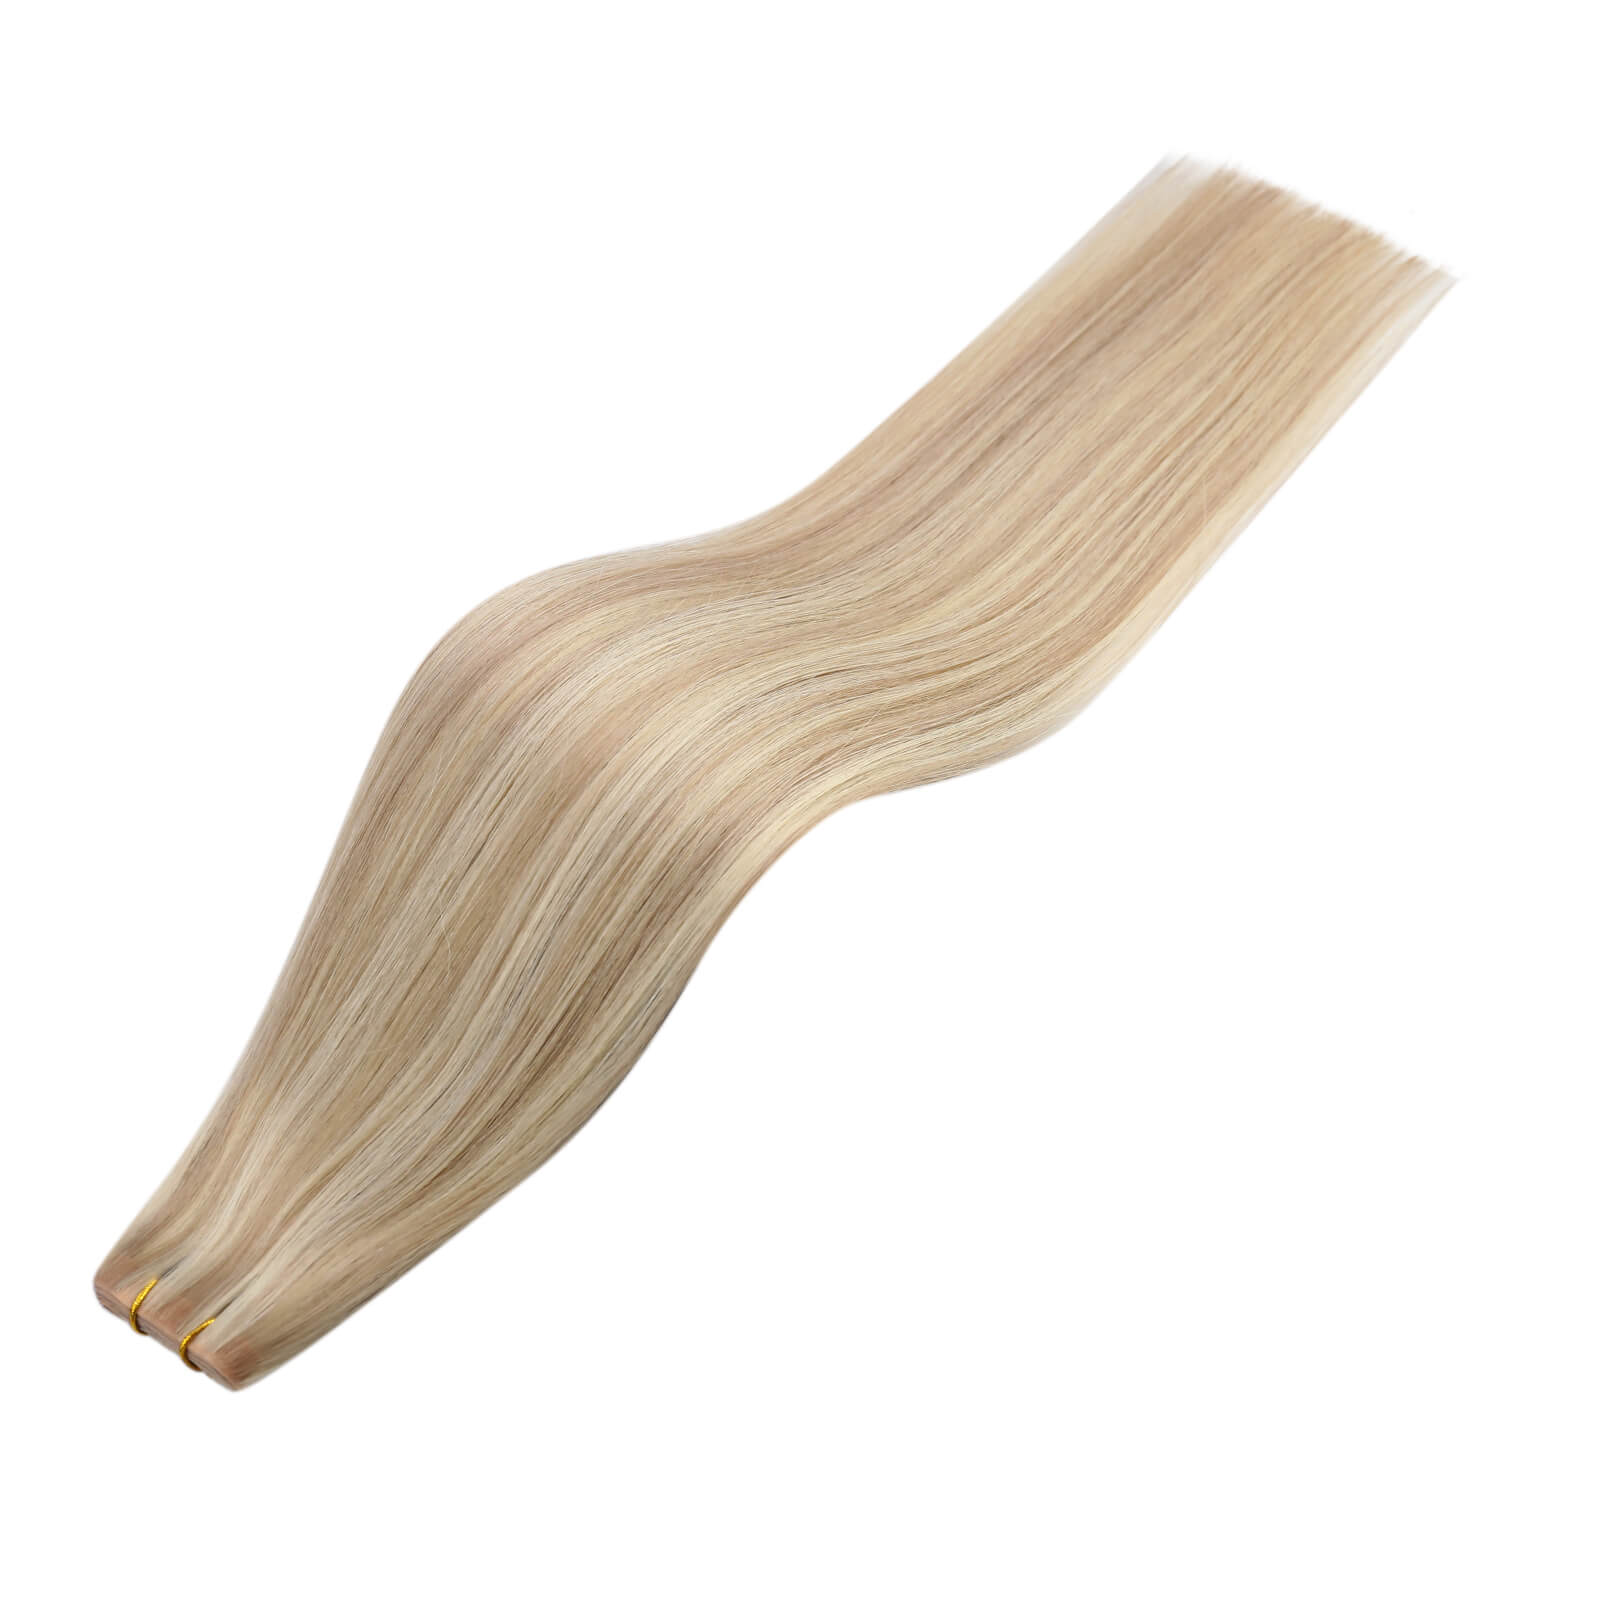 hair wefts,sew in weft hair extensions,bead weft hair extensions,XO Invisible weft,XO hair extensions,xo invisible weft extensions,pu wefts hair extensions,18 inch hair extensions,pu hole invisible wefts